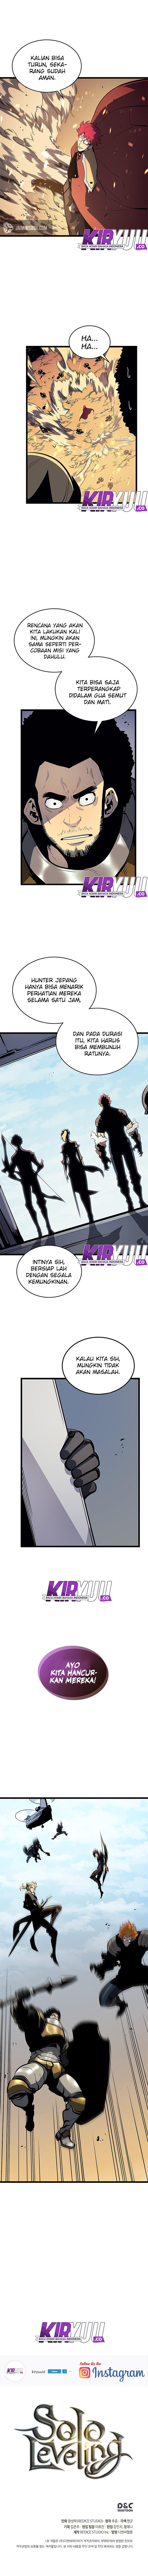 Solo Leveling Chapter 95